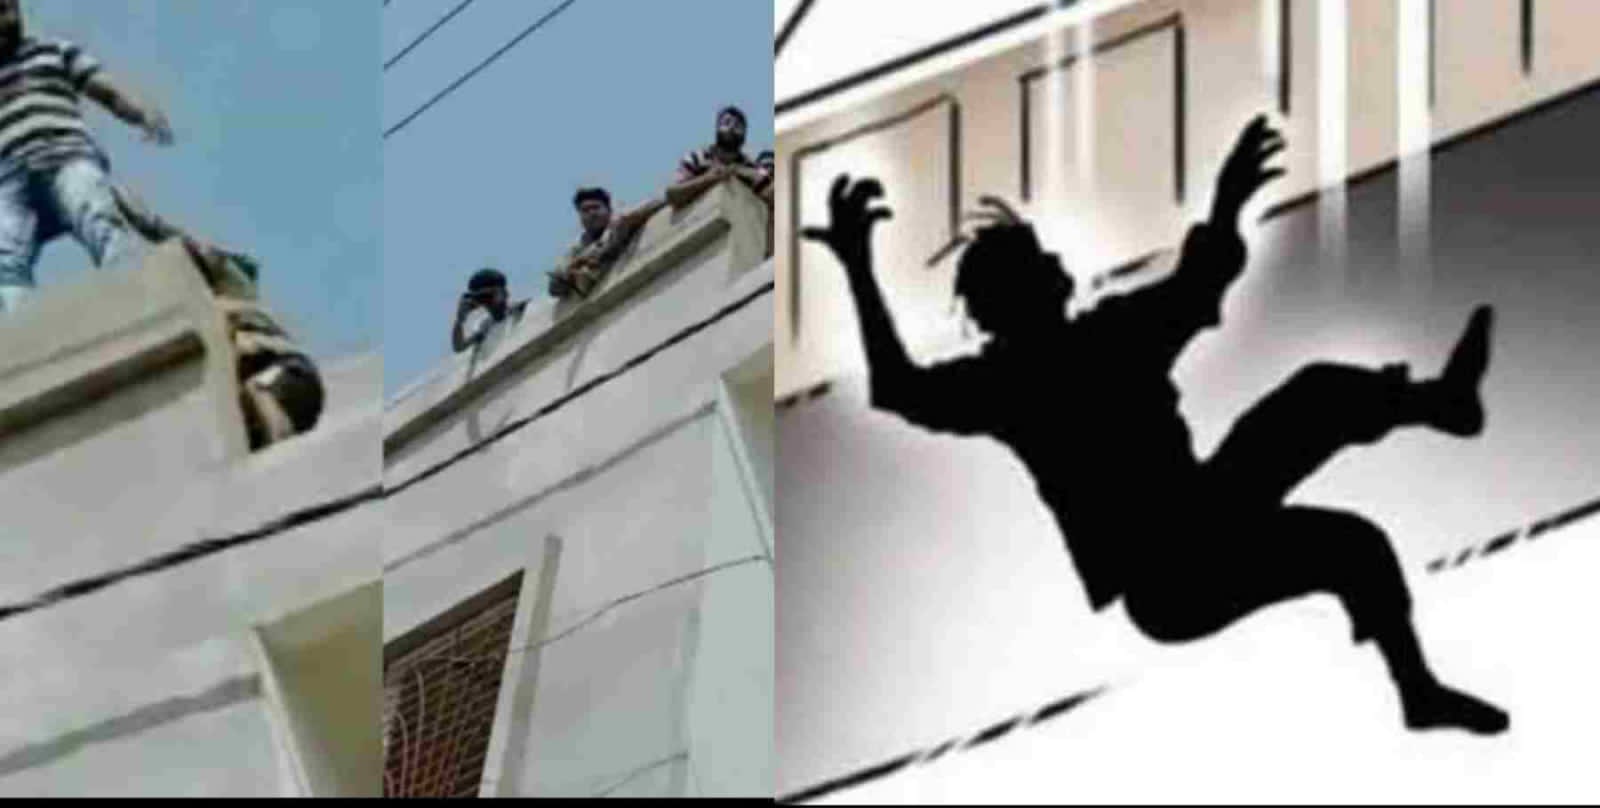 Dehradun news : A young man ravindra bisht fell from the roof of a two-storey house, died